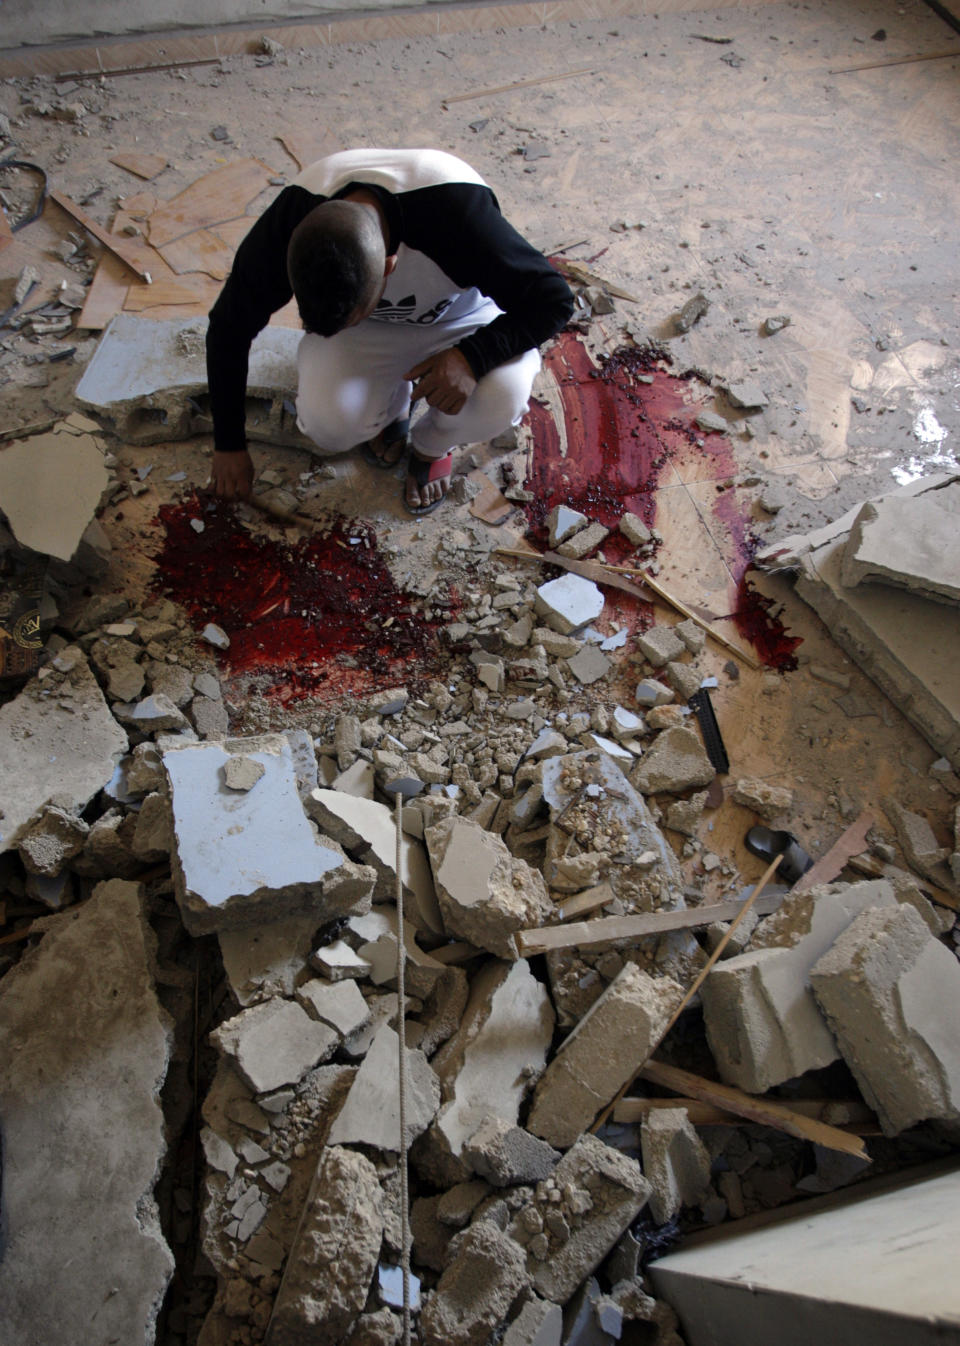 A Palestinian inspects the blood-marked floor inside the home of Hamza Abu el-Heija, where he was killed by Israeli troops, in the West Bank refugee camp of Jenin, Saturday, March 22, 2014. Israeli troops killed at least four Palestinians in an early morning raid that was followed by a clash with angry protesters in a West Bank town on Saturday, the Israeli military and Palestinian security officials said, in the deadliest incident in months. The Israeli military said the raid aimed to arrest Hamza Abu el-Heija, a 22-year-old Hamas operative wanted for involvement in shooting and bombing attacks against Israelis. (AP Photo/Mohammed Ballas)